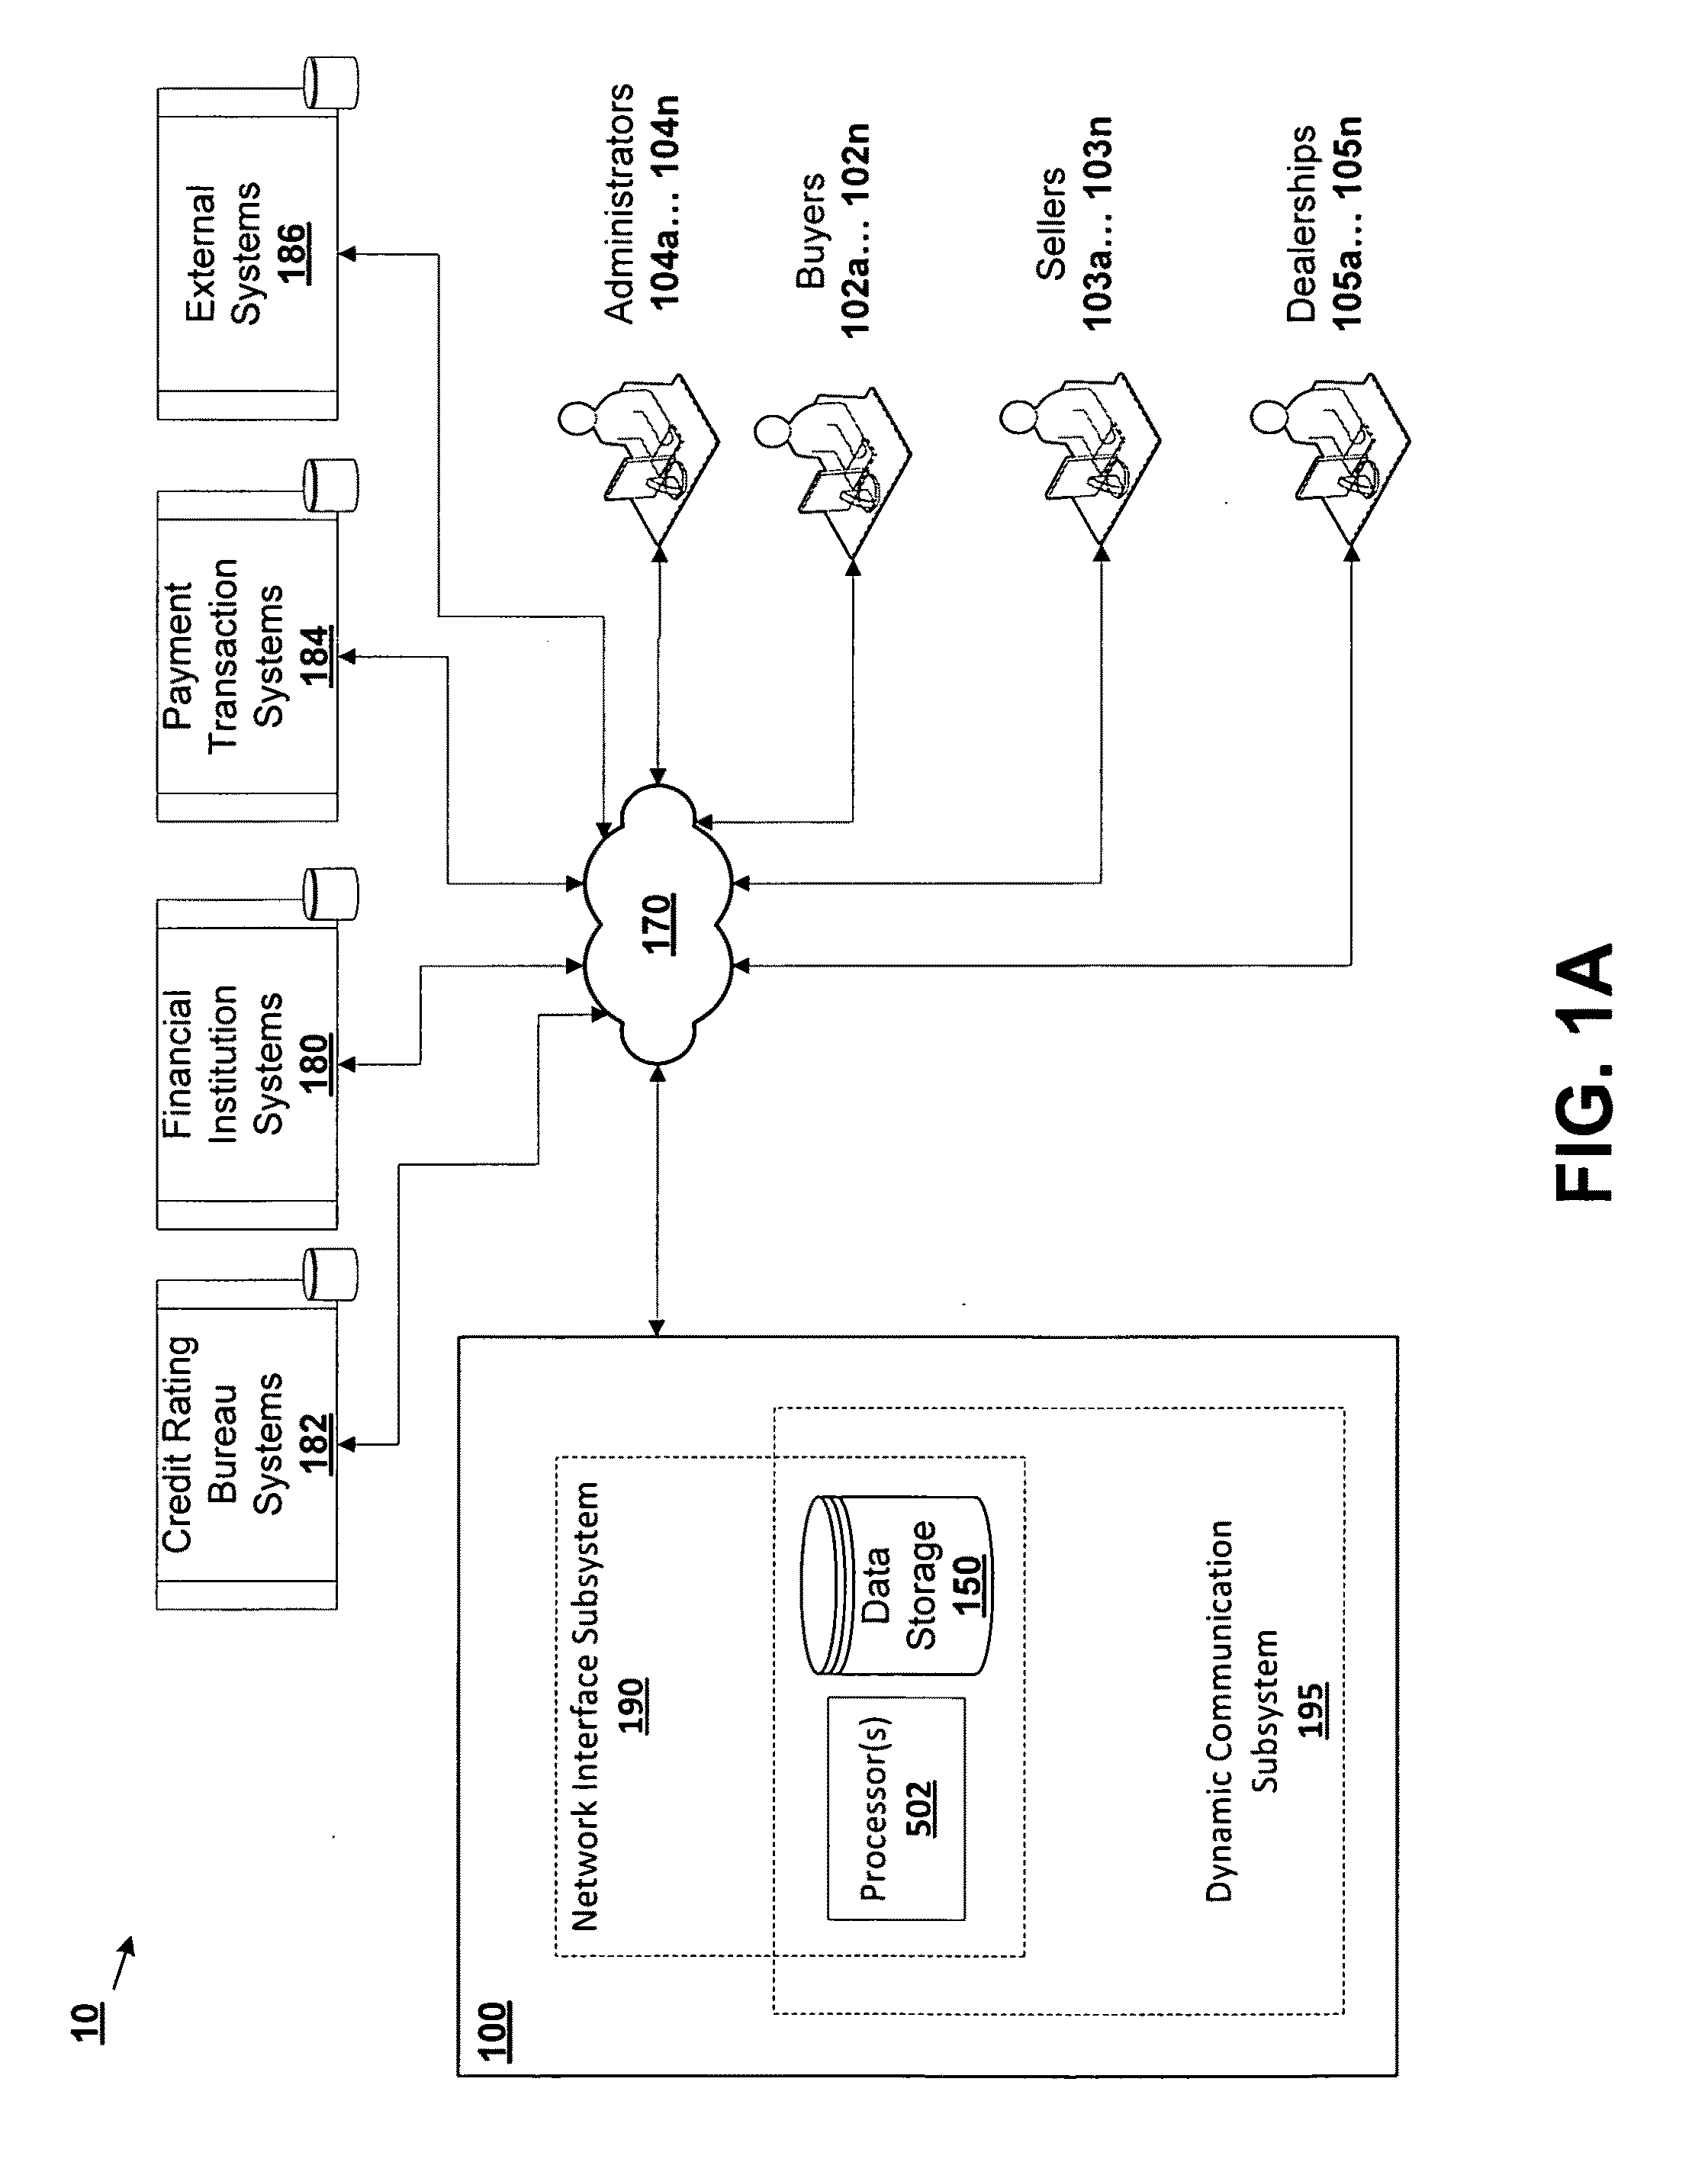 Systems and methods for presenting vehicular transaction information in a data communication network